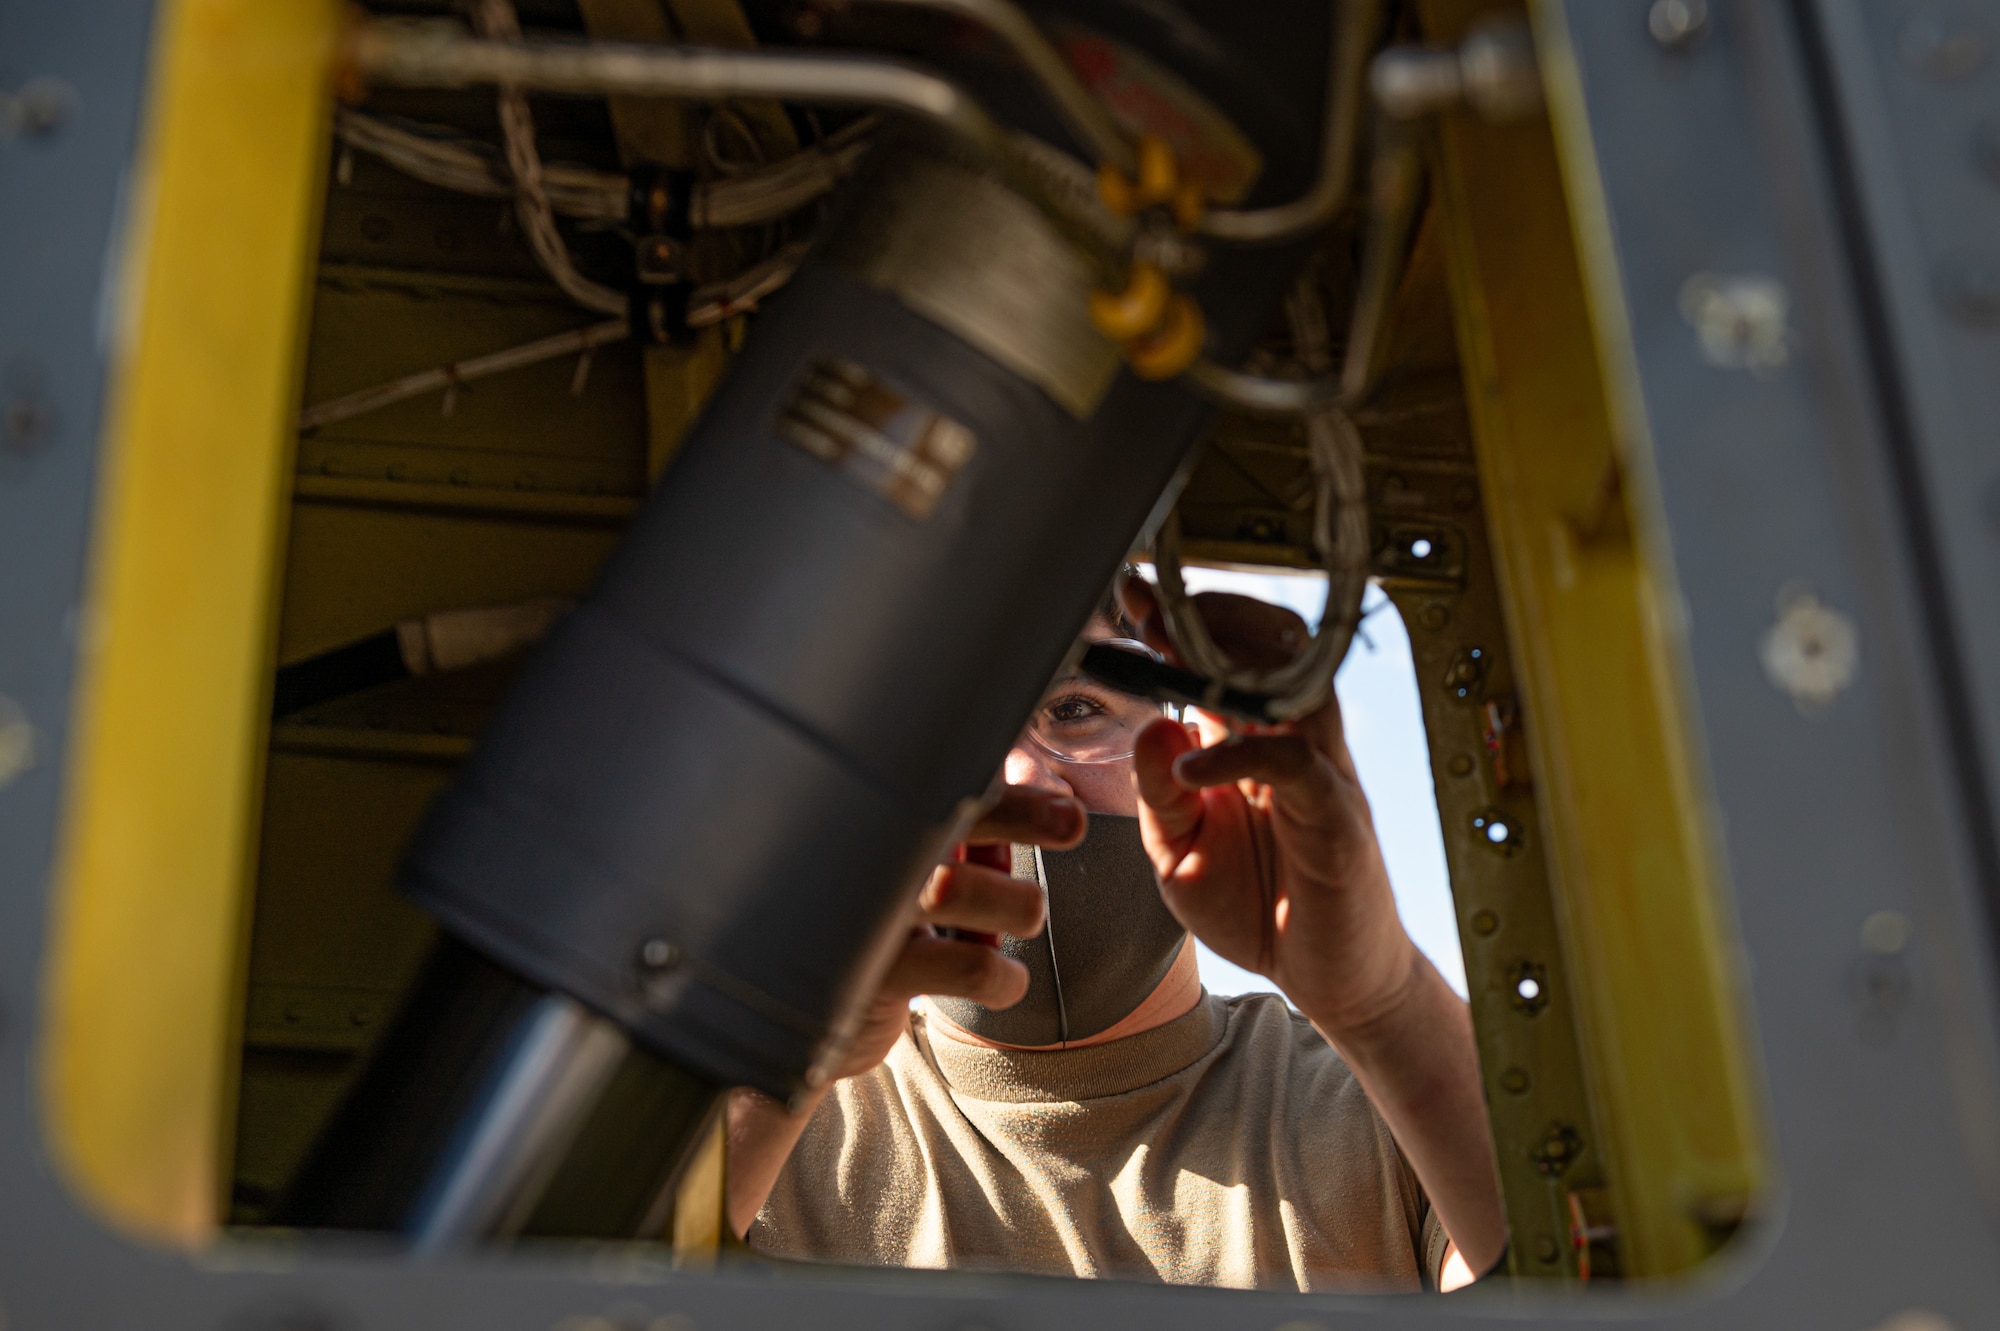 An Airman performing maintenance on a helicopter